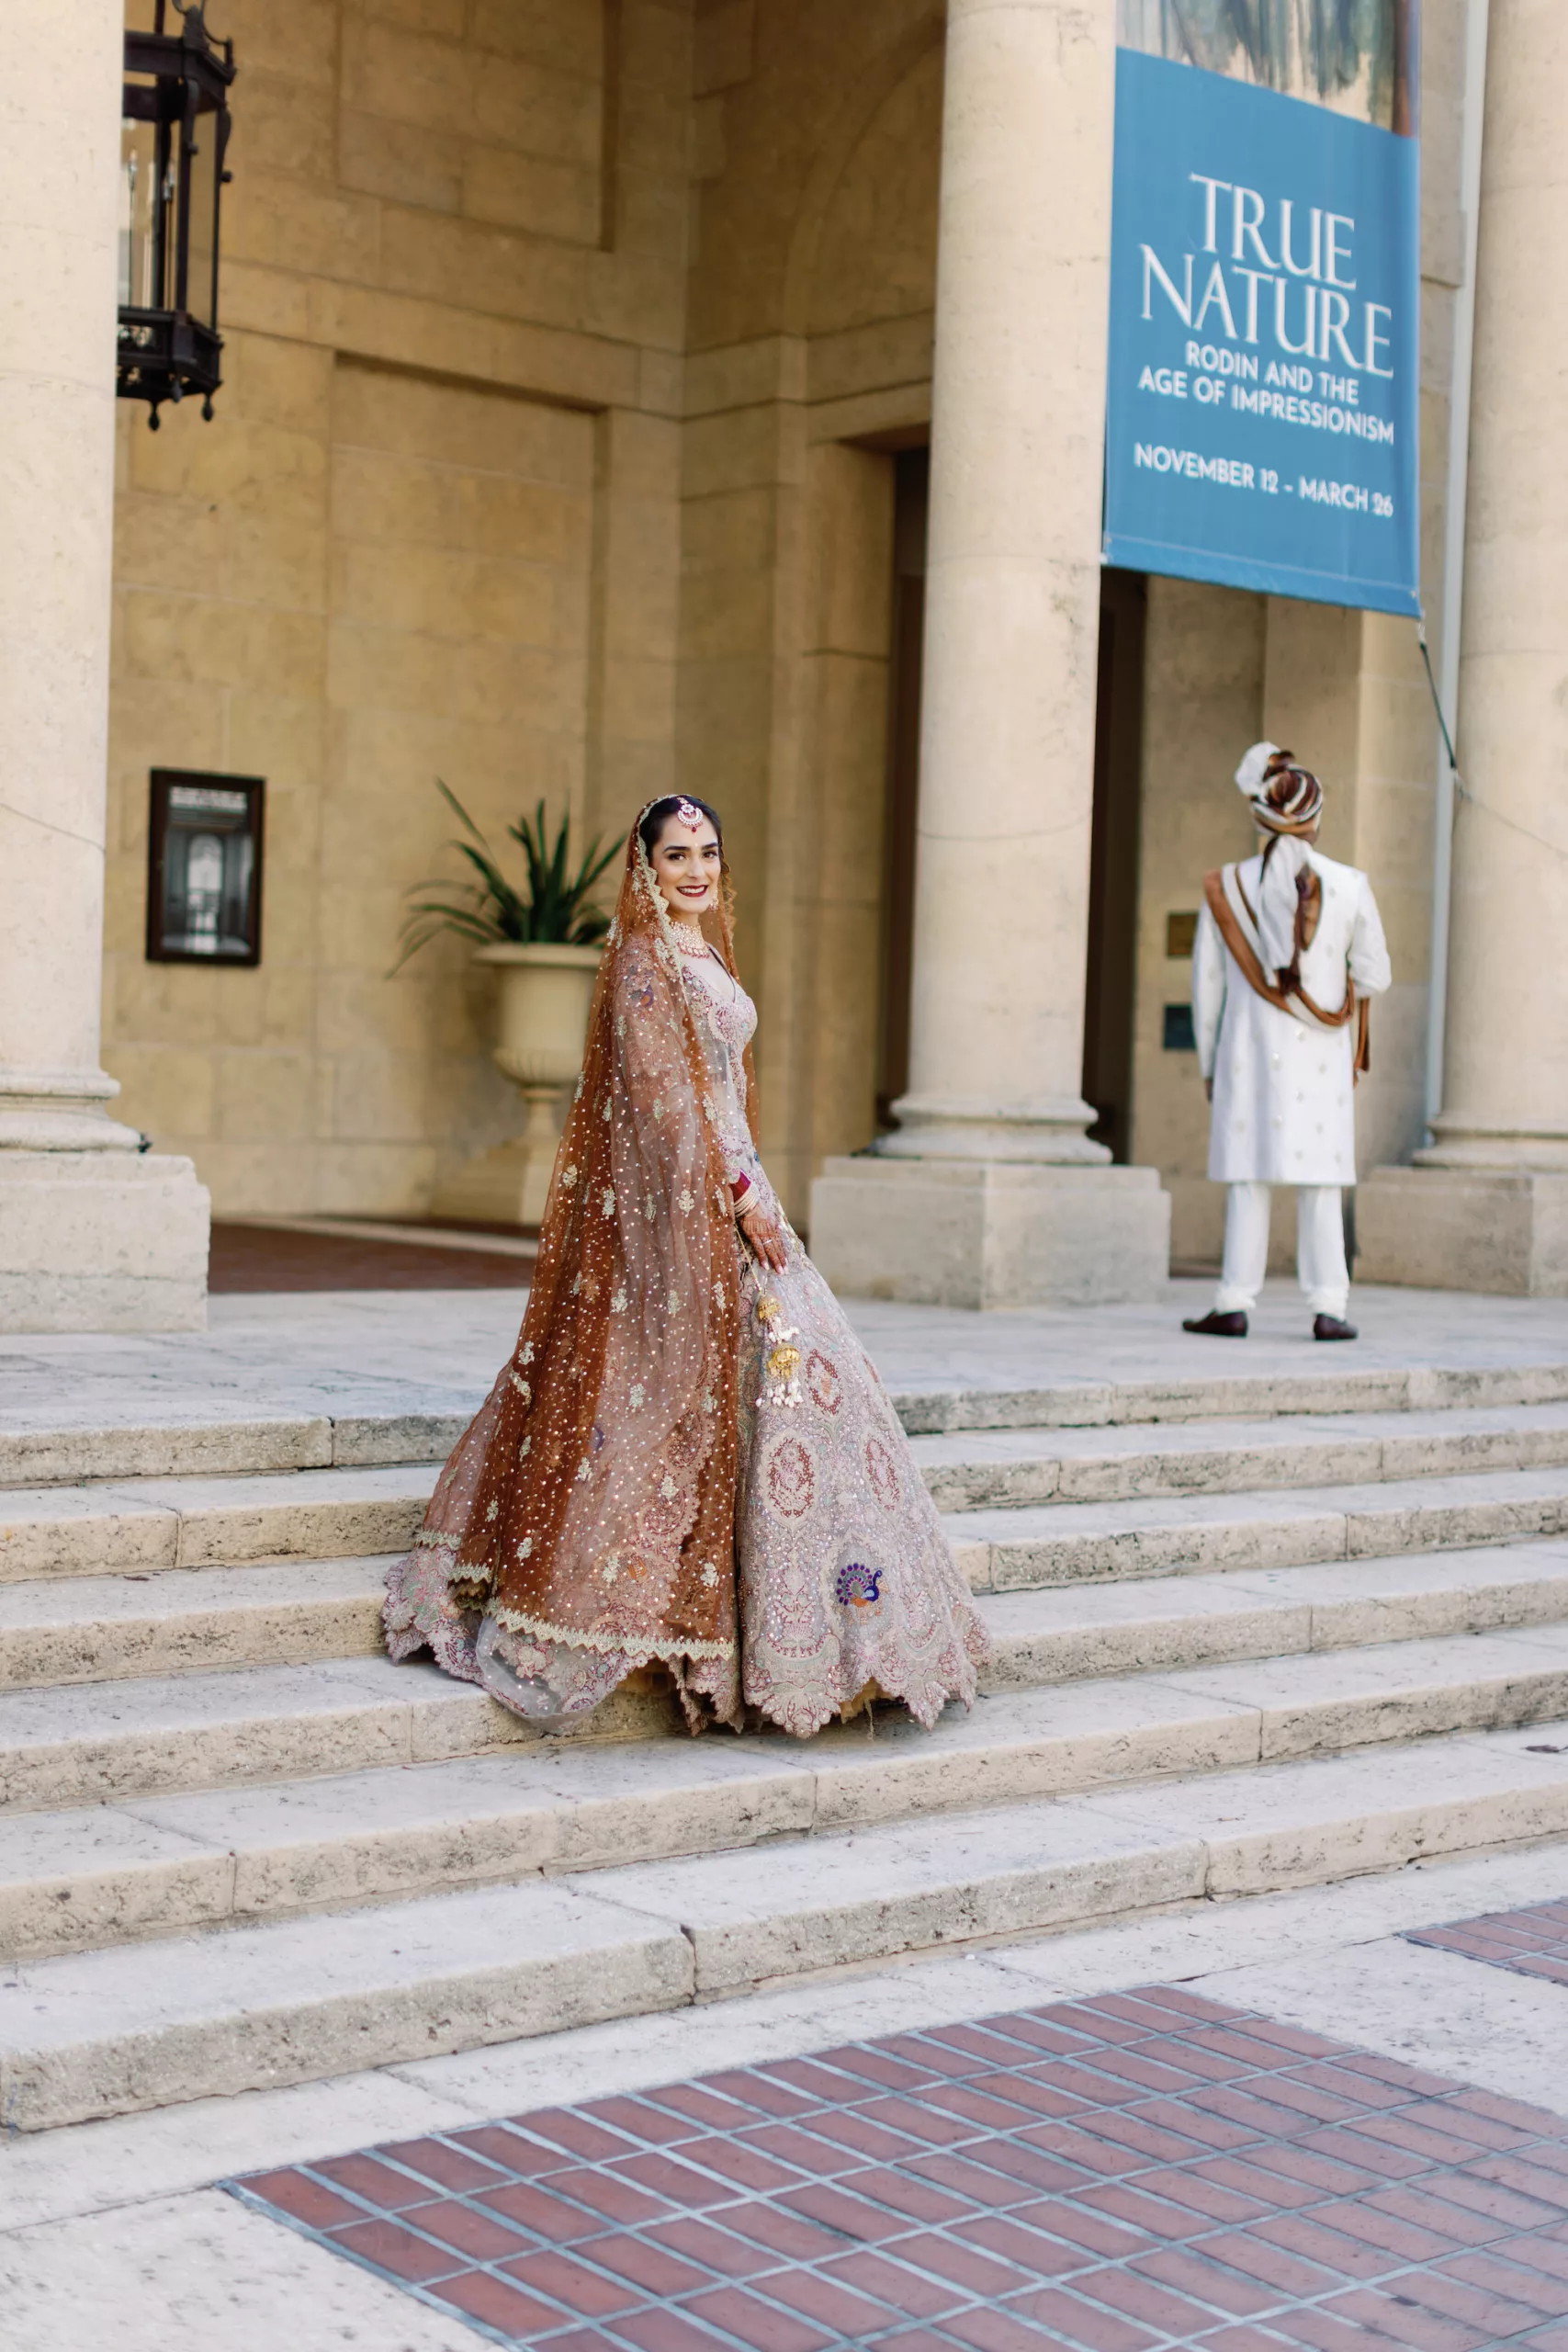 Bride and Groom First Look Wedding Portrait | Neutral Burnt Orange and Cream Beaded Rimple and Harpreet Lehenga Indian Wedding Bridal Attire Inspiration | Tampa Bay Hair and Makeup Artist Michele Renee The Studio